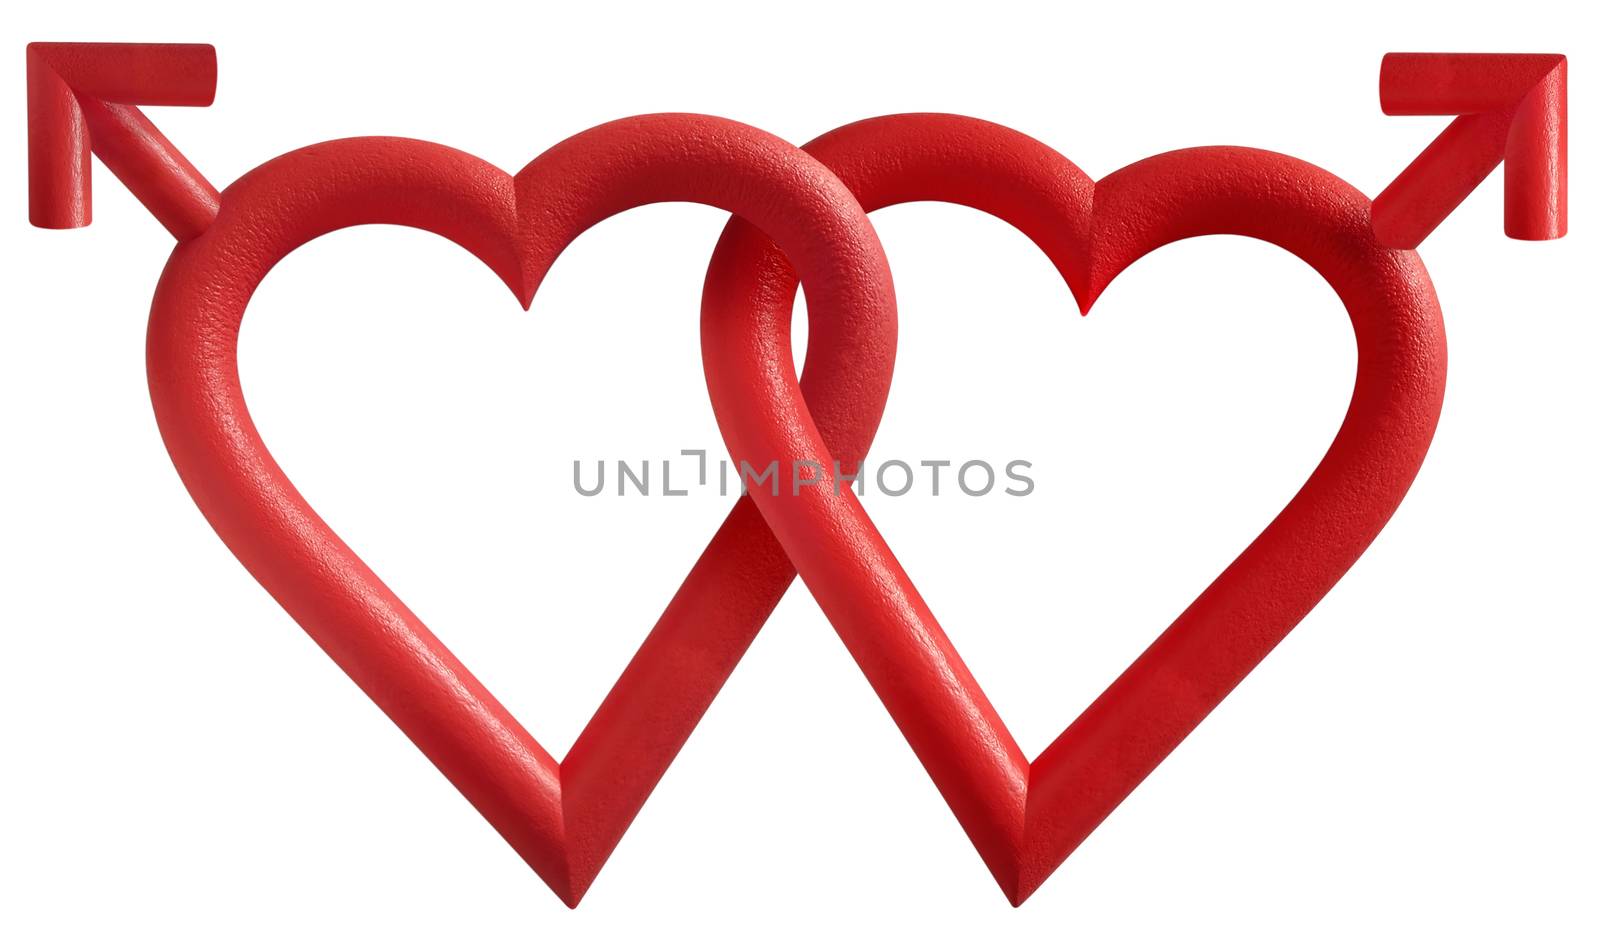 Gay couple represented by two interlocking hearts and male symbols